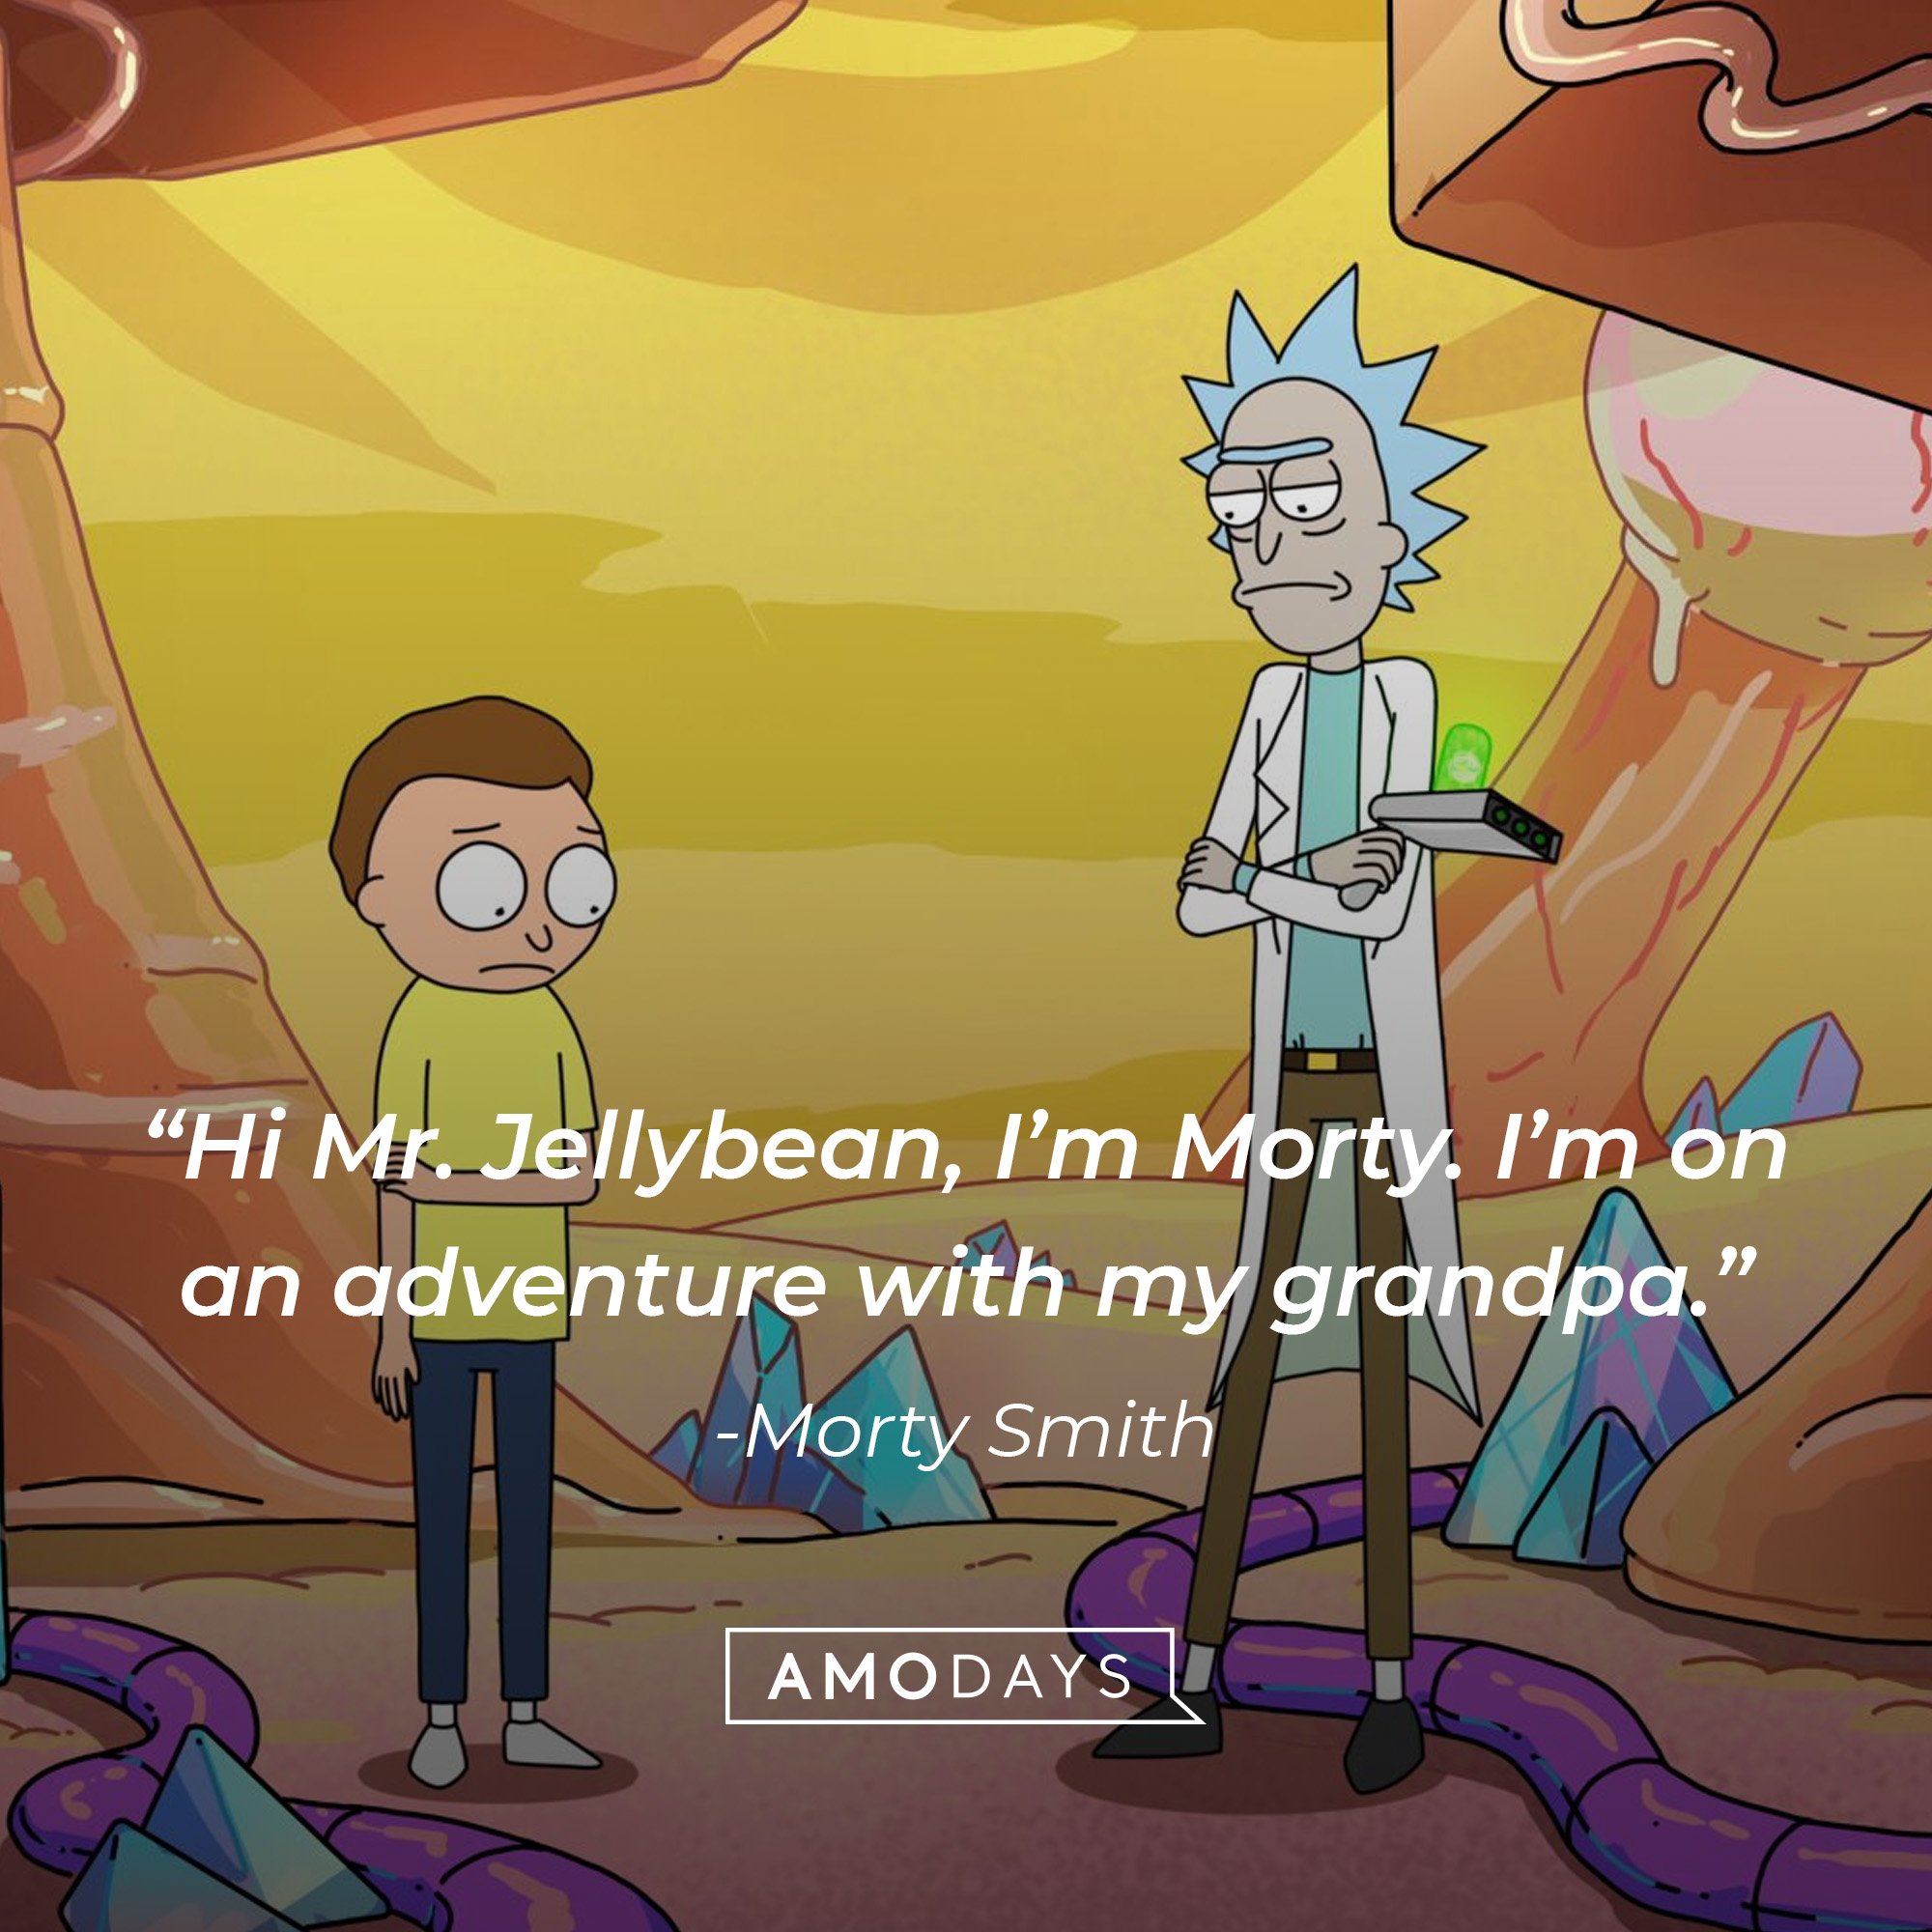 Morty Smith’s quote: “Hi Mr. Jellybean, I’m Morty. I’m on an adventure with my grandpa.” | Image: AmoDays